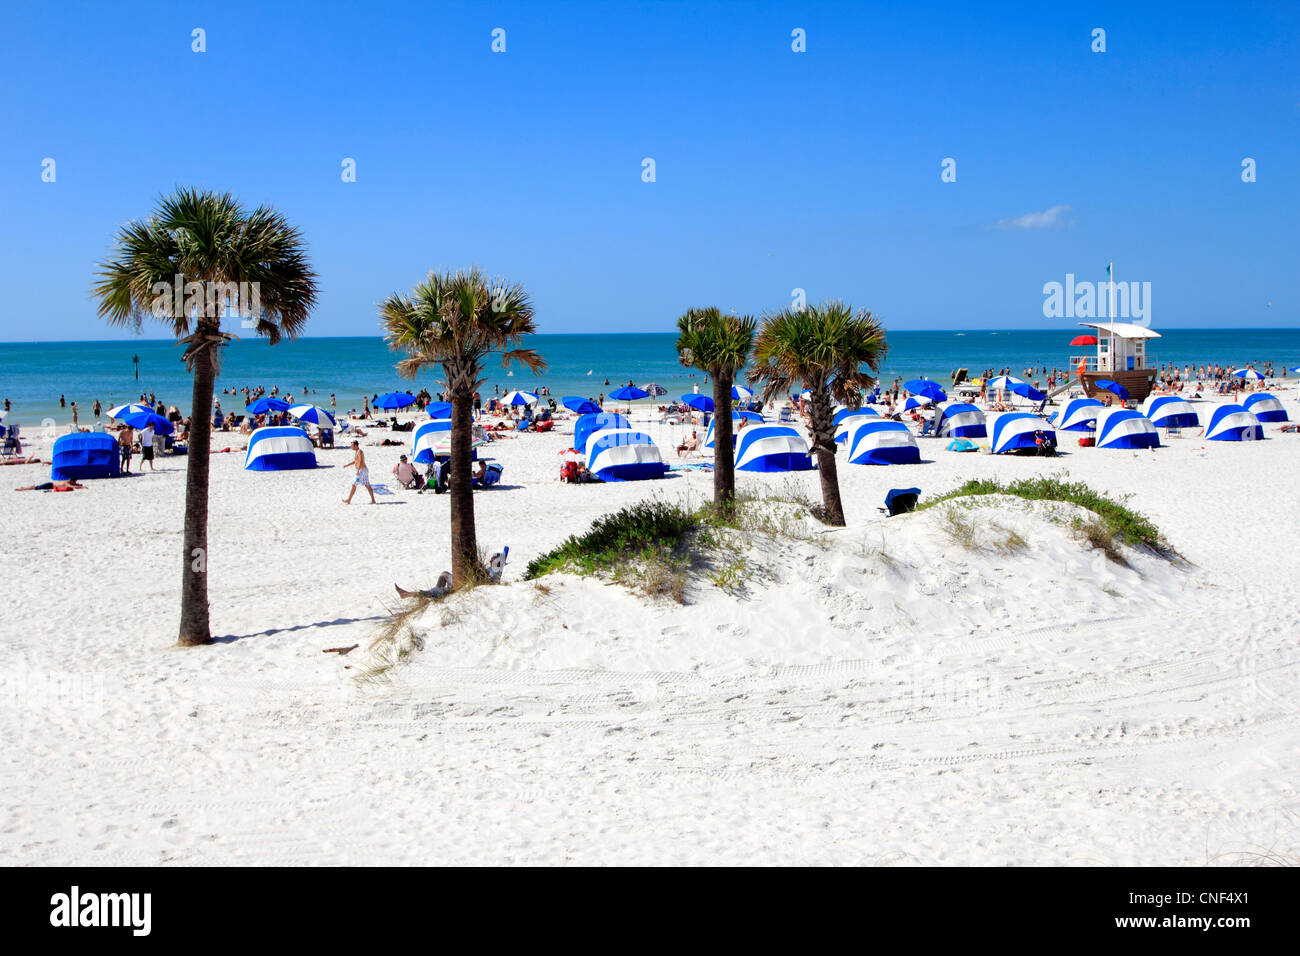 Clearwater Beach and resort area, west central gulf coast, Florida, USA Stock Photo